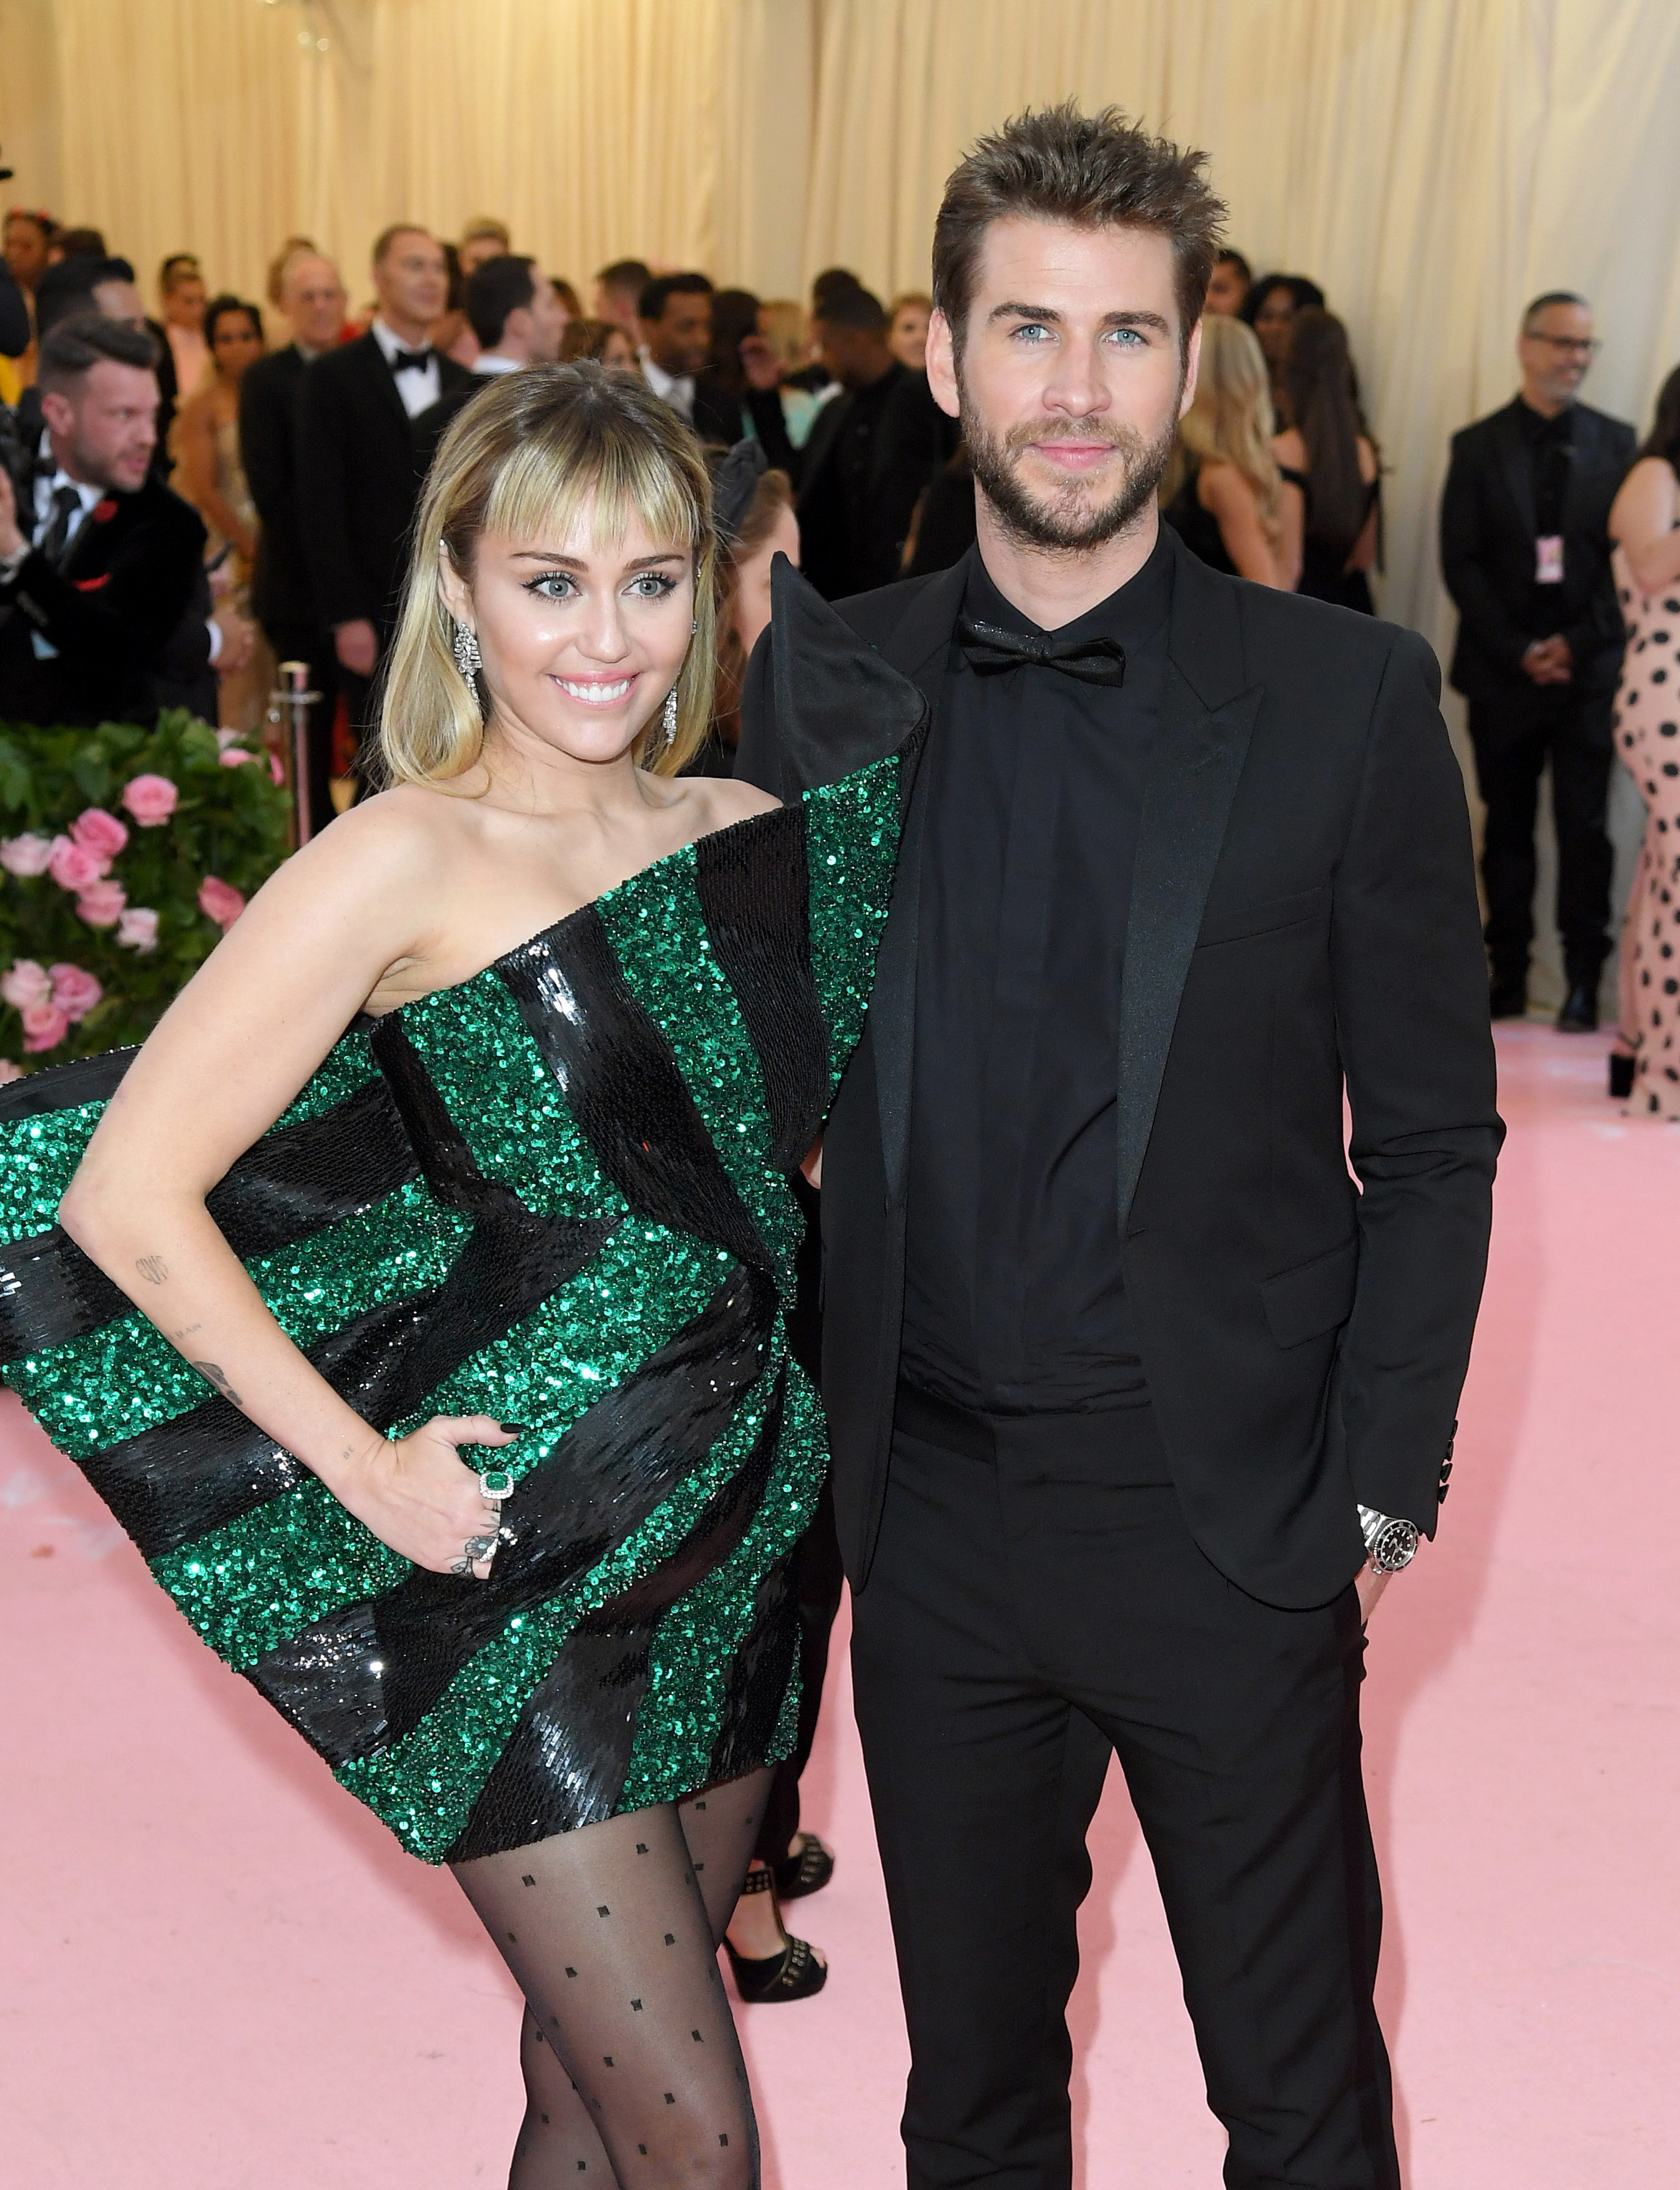 Miley Cyrus in a green and black sequined dress with Liam Hemsworth in a black suit on a gala event